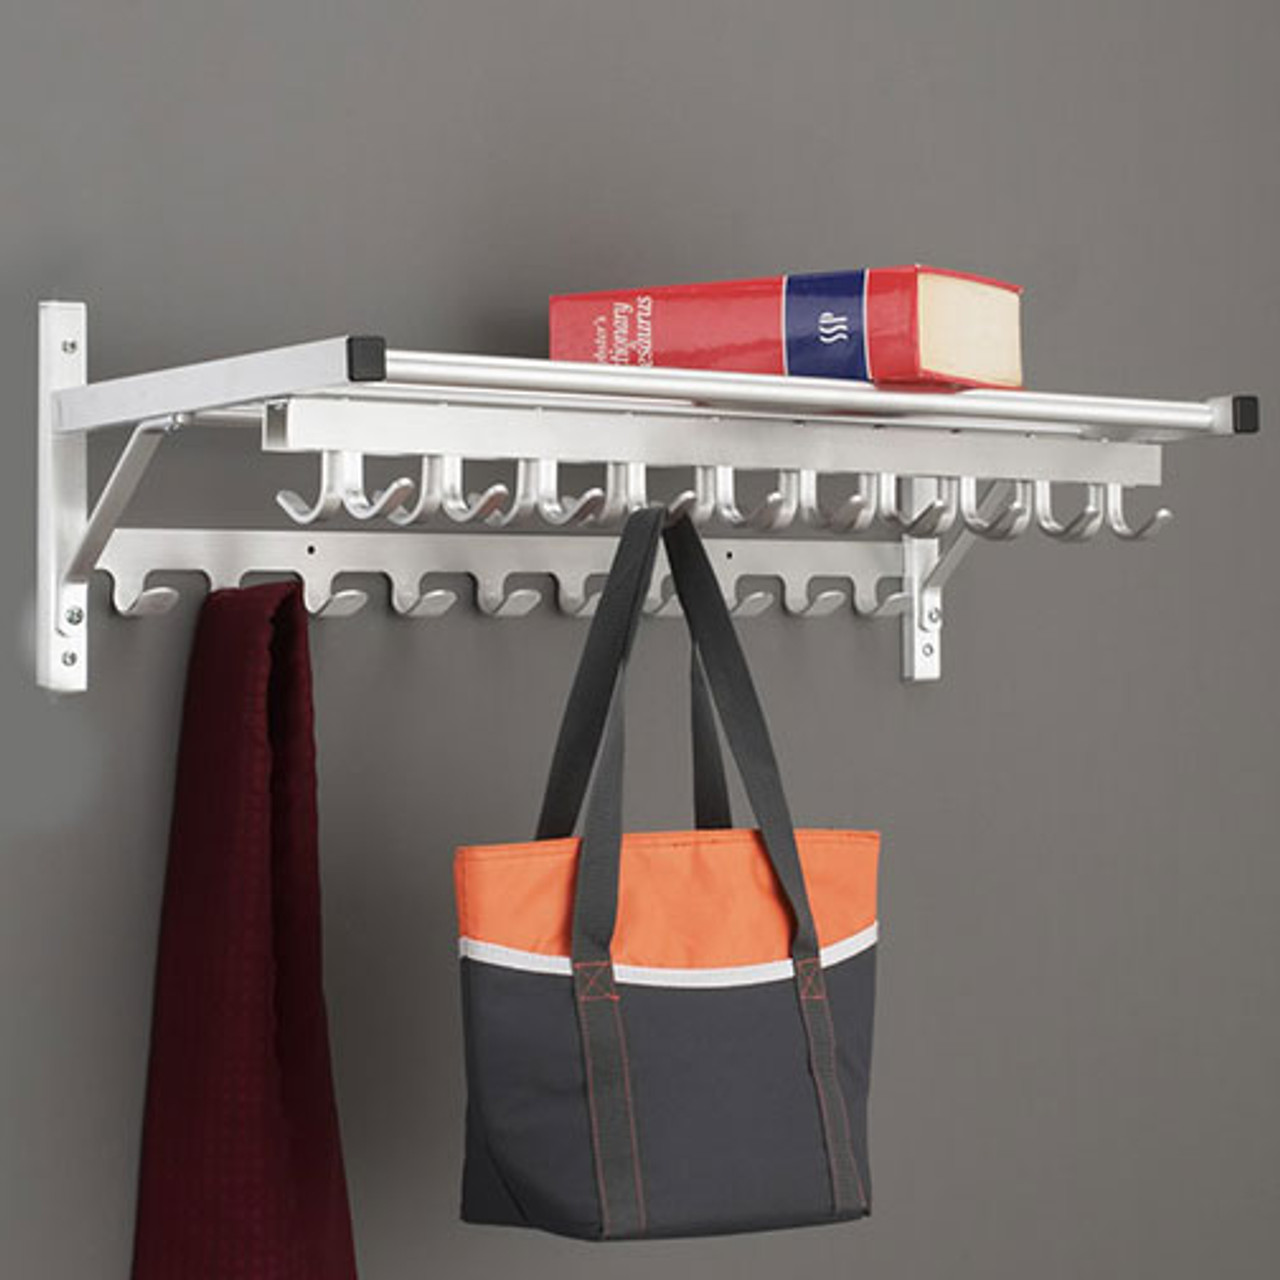 Modular Wall Coat Rack with Hooks - 203 Series - Image Illustrates Design, Not to Scale